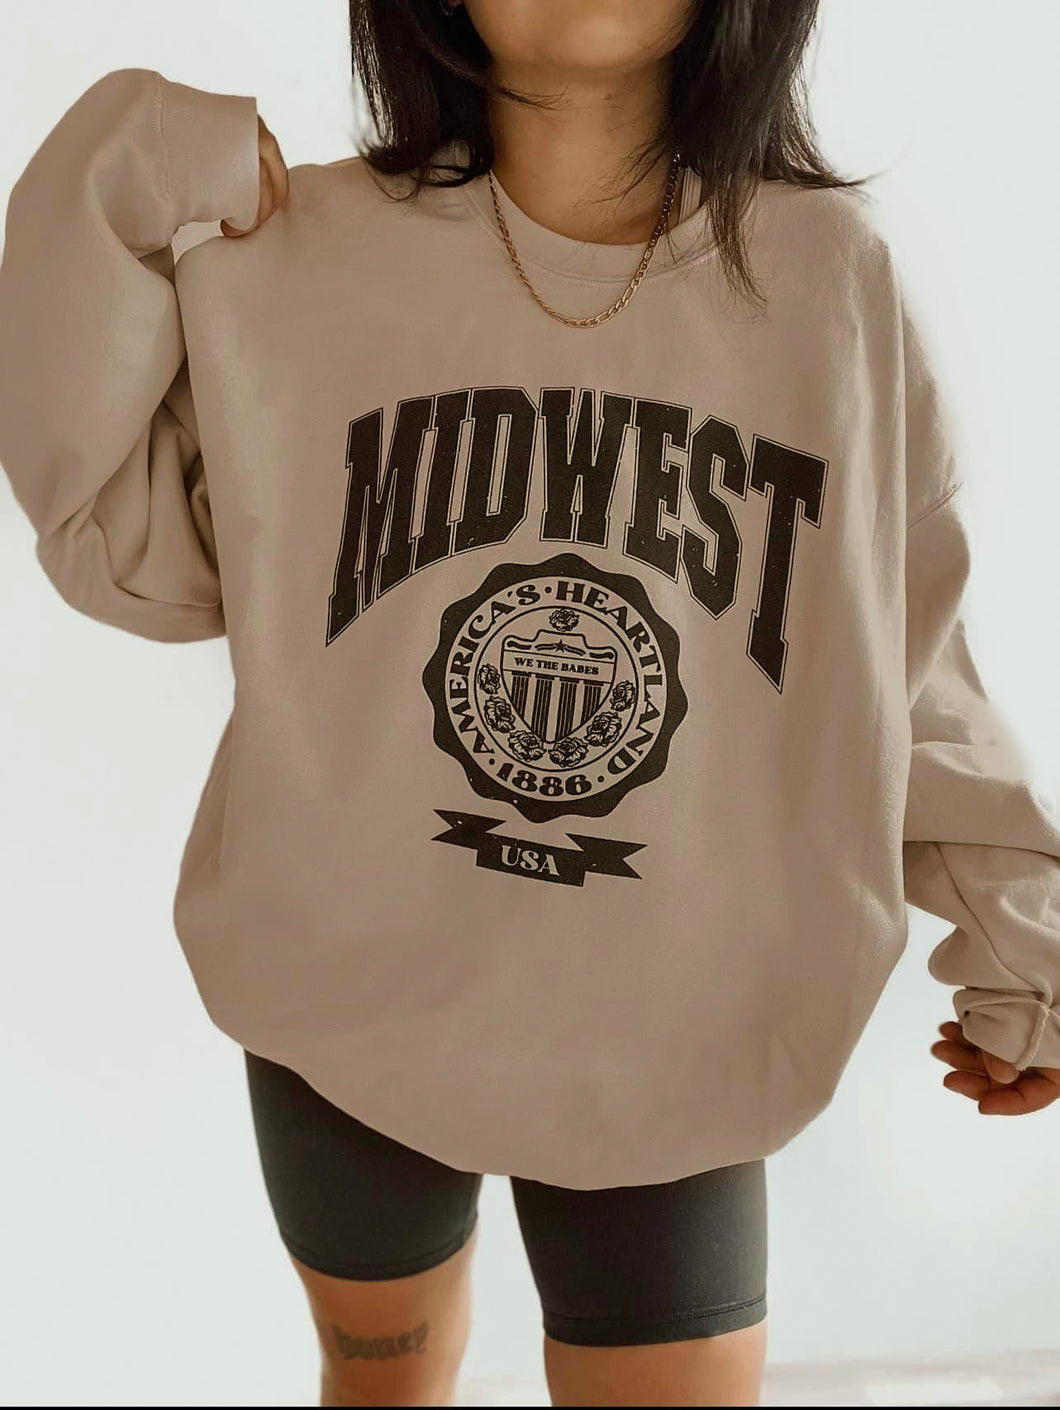 Midwest // America's Heartland 1886